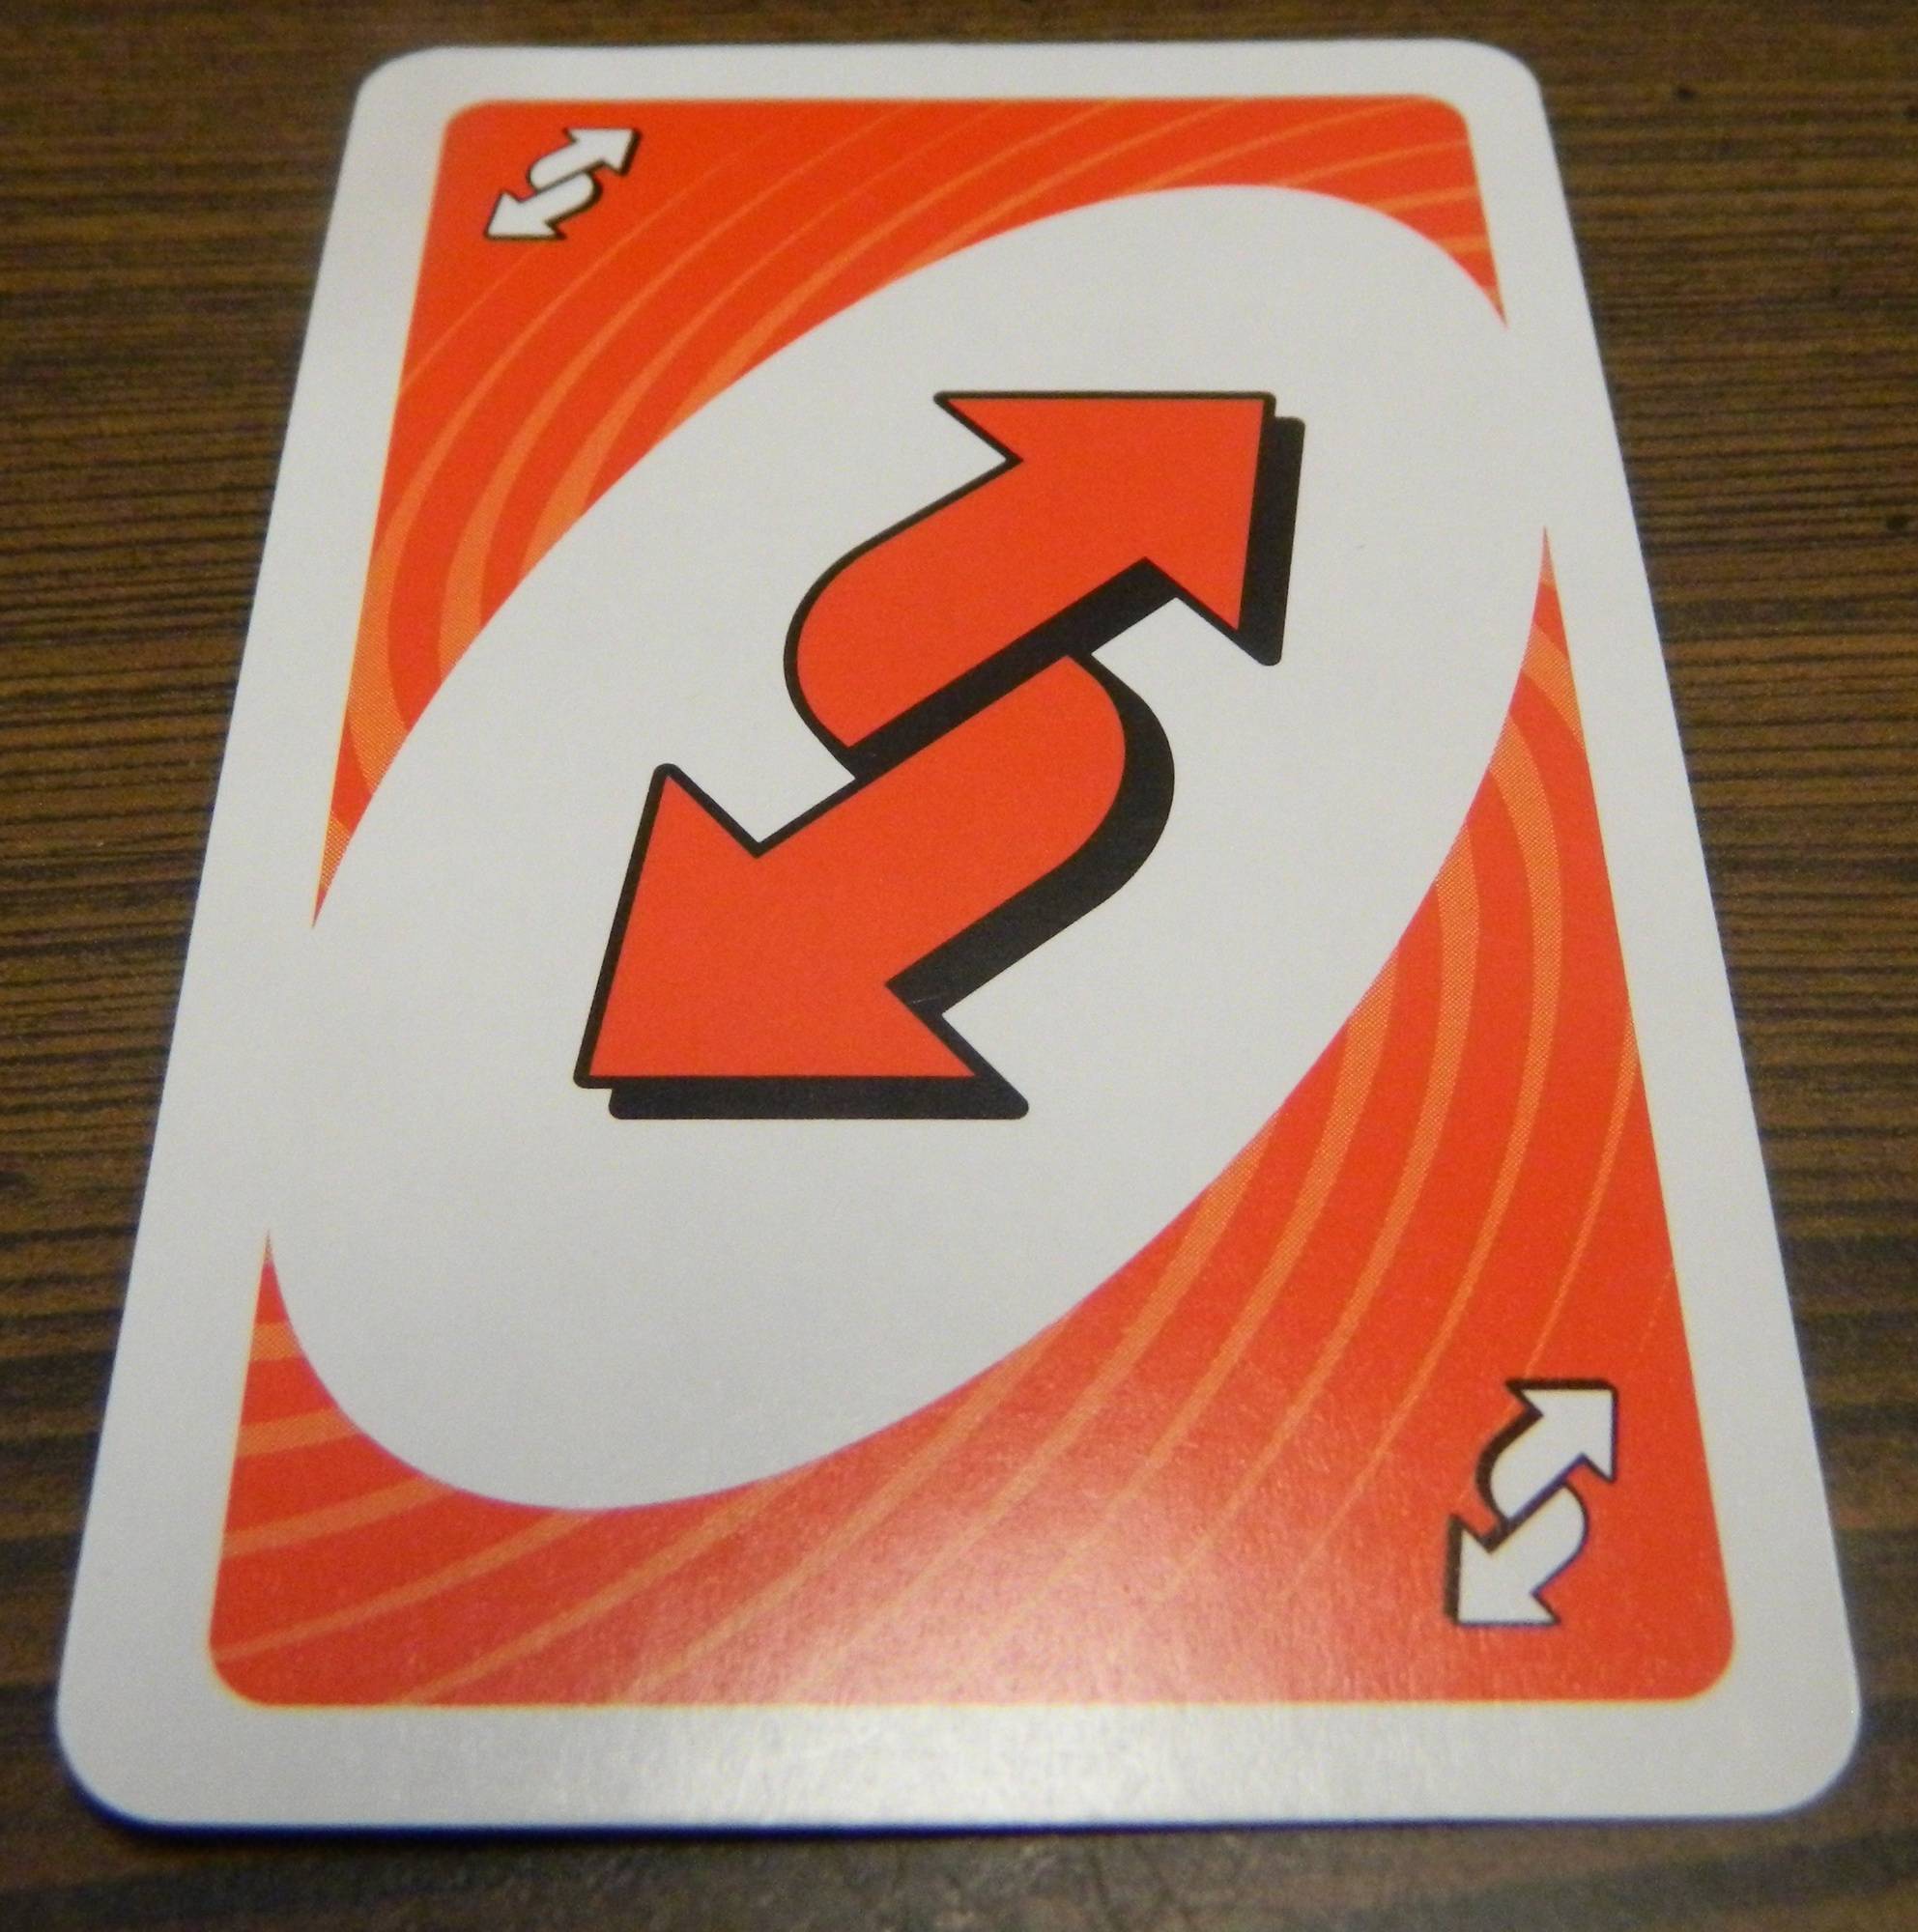 uno-spin-card-game-review-and-rules-geeky-hobbies